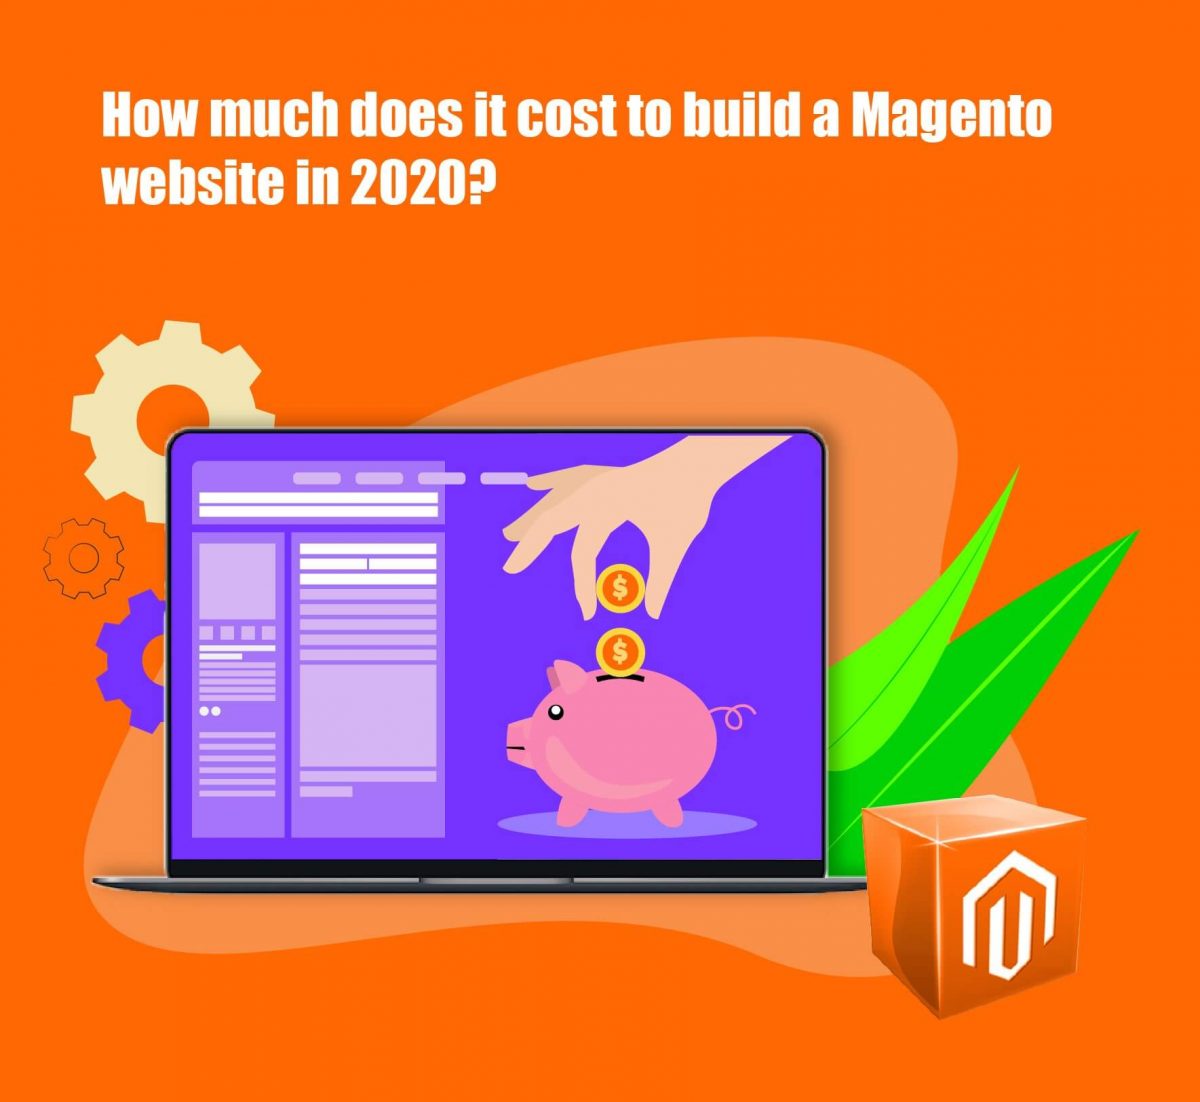 How much does it cost to build a Magento website in 2020?